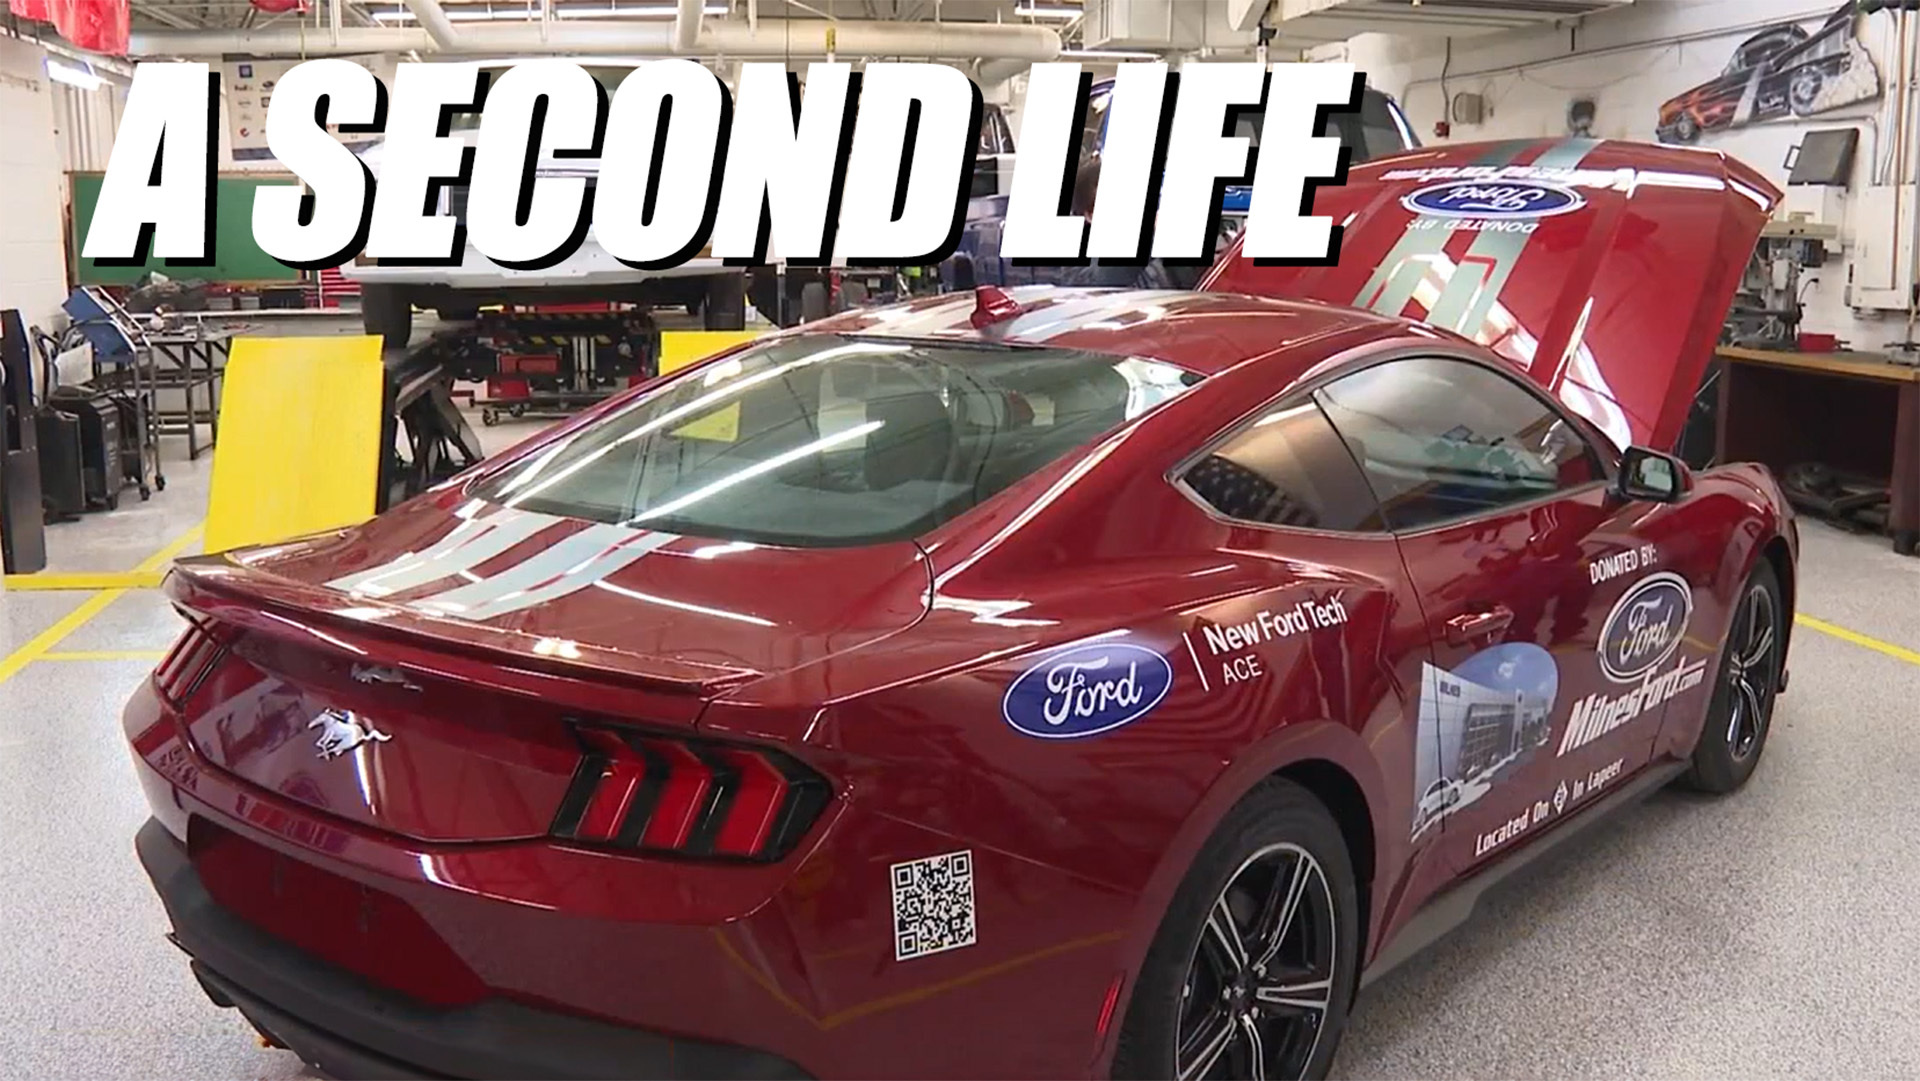 Ford Refuses To Kill Flood-Damaged Mustangs, Sends Them To Schools Instead [Video]